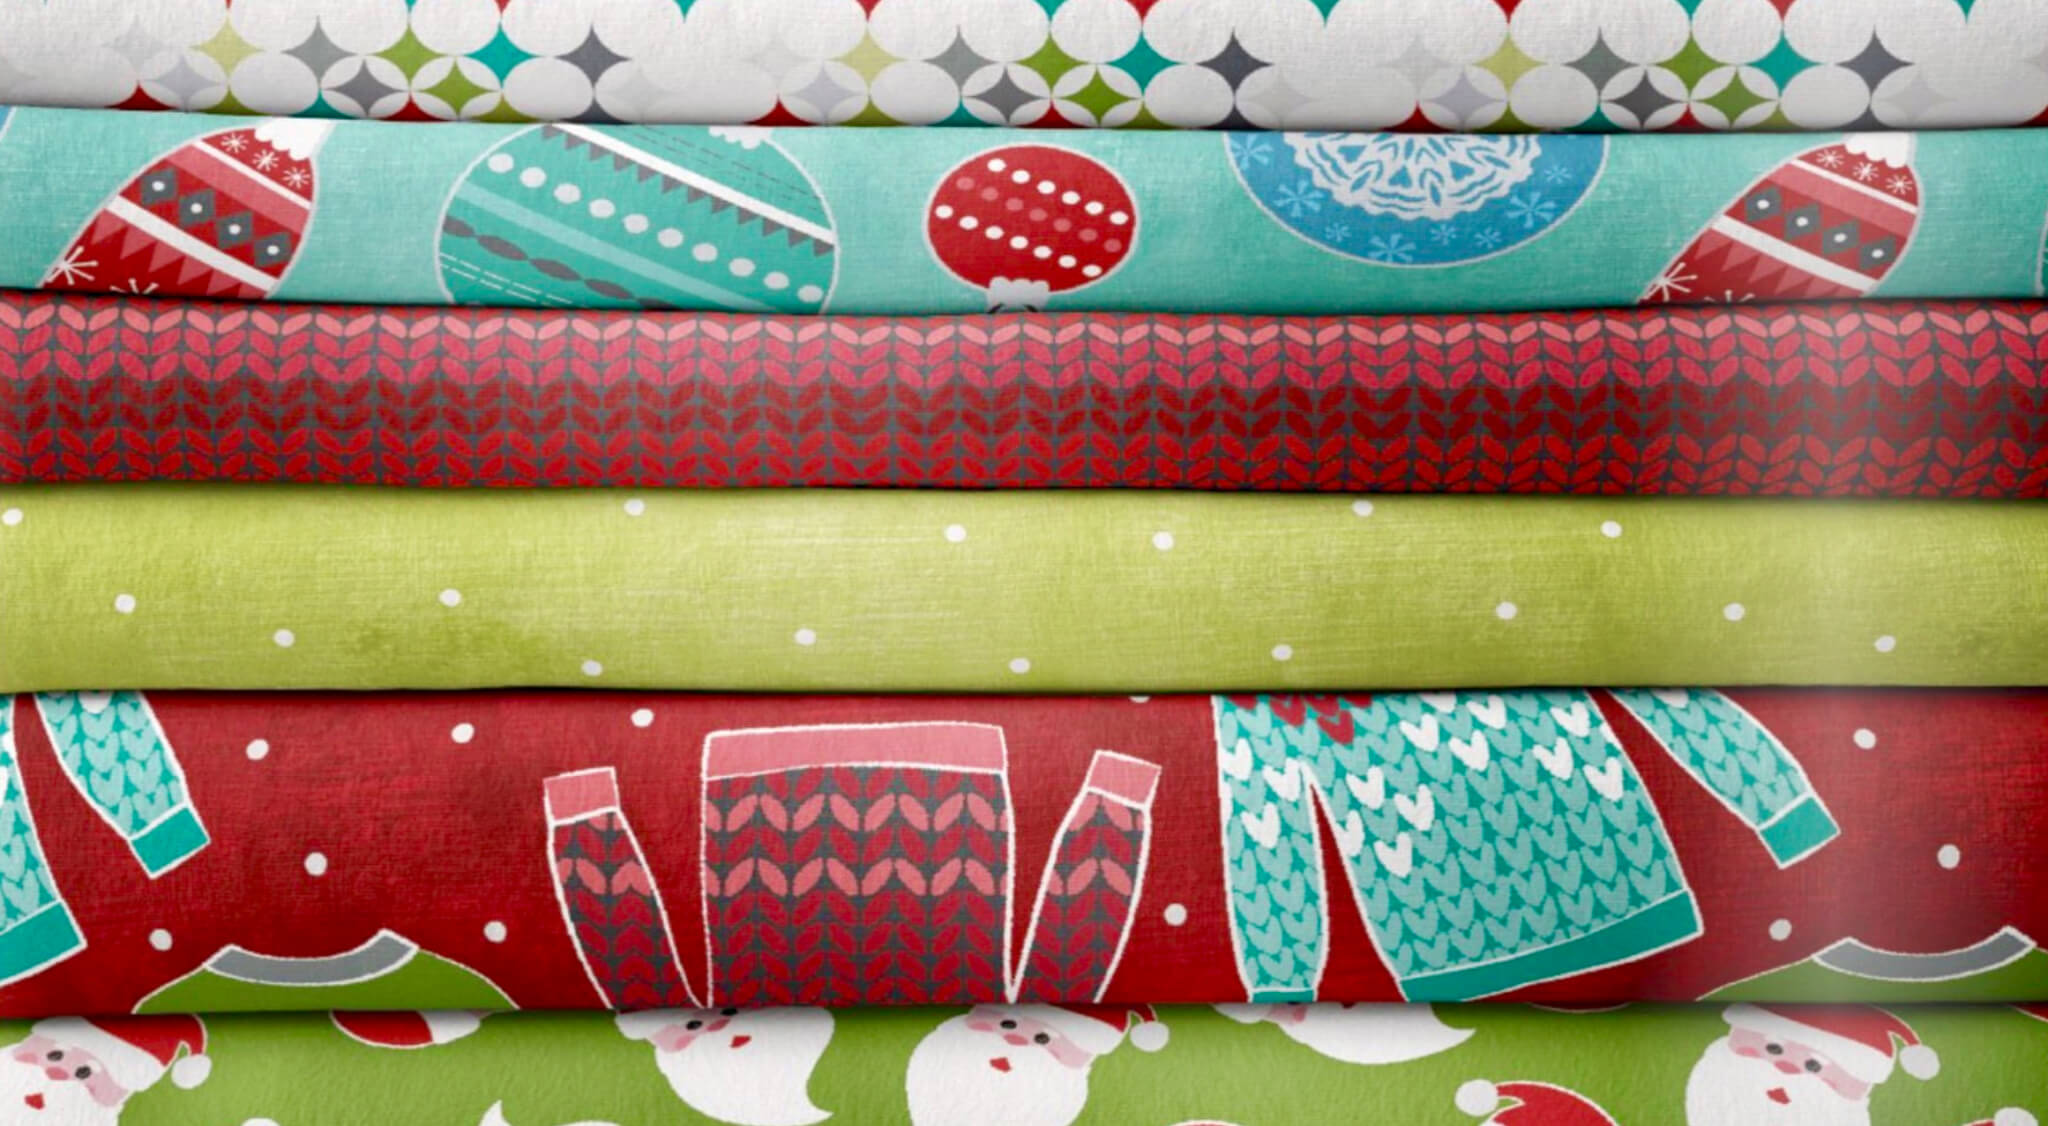 NEW! A Cozy Winter Fabrics by Cherry Guidry of Cherry Blossoms Studio for Benartex Now Available at ShopNZP.com